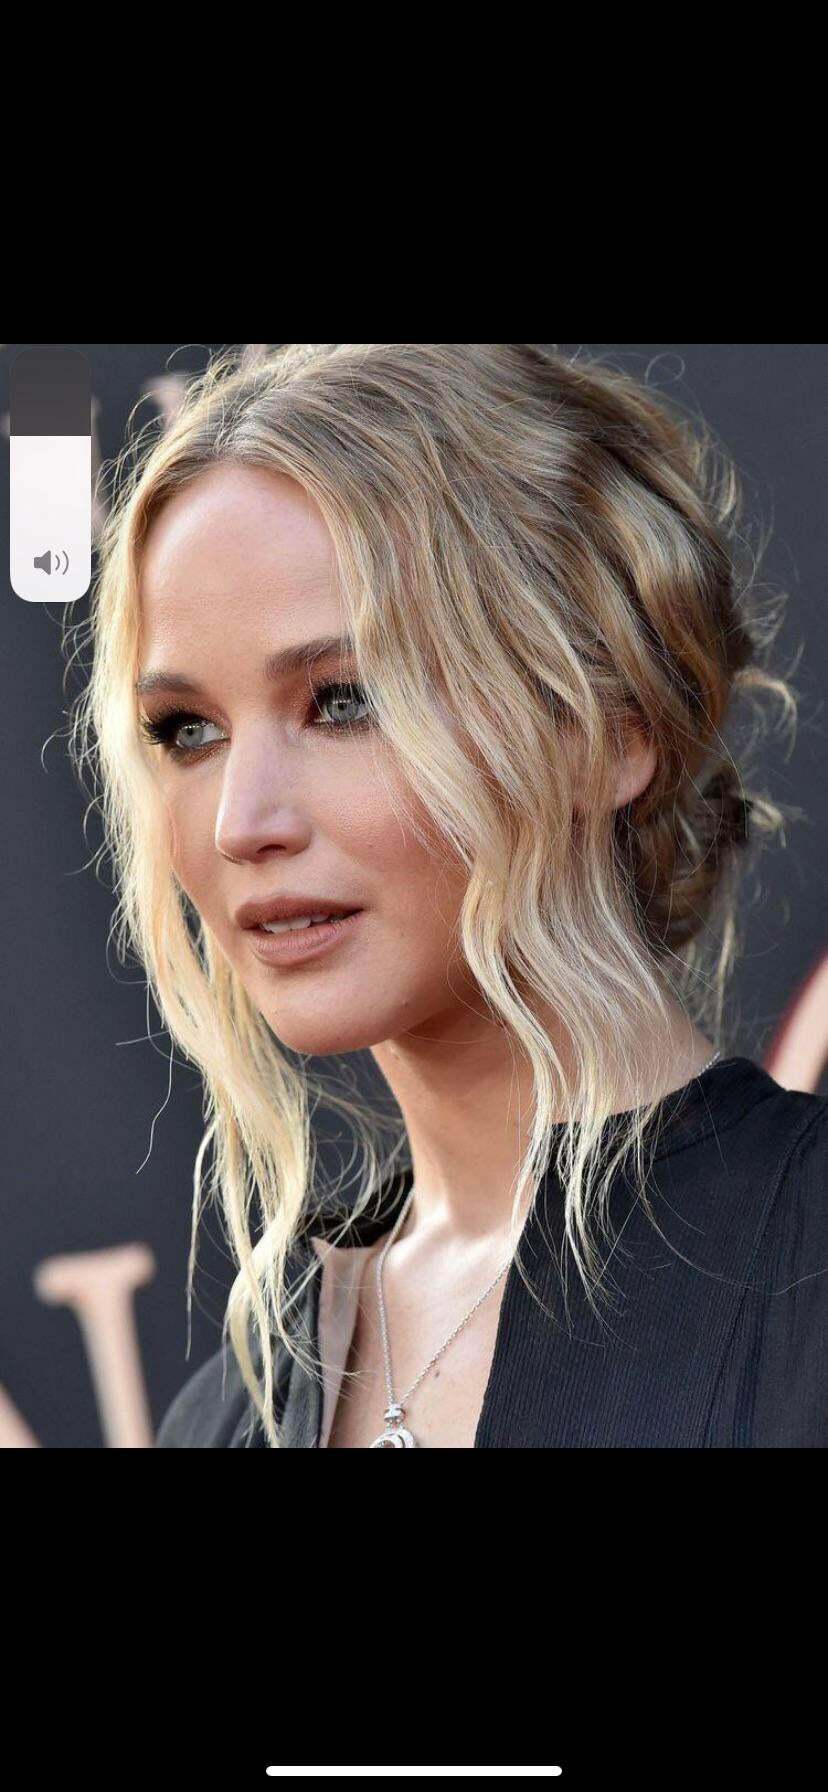 You’re Jennifer Lawrence’s rich “boyfriend”. But you’re only around because her parents’ love you and you buy her things. She invites me over for dinner.